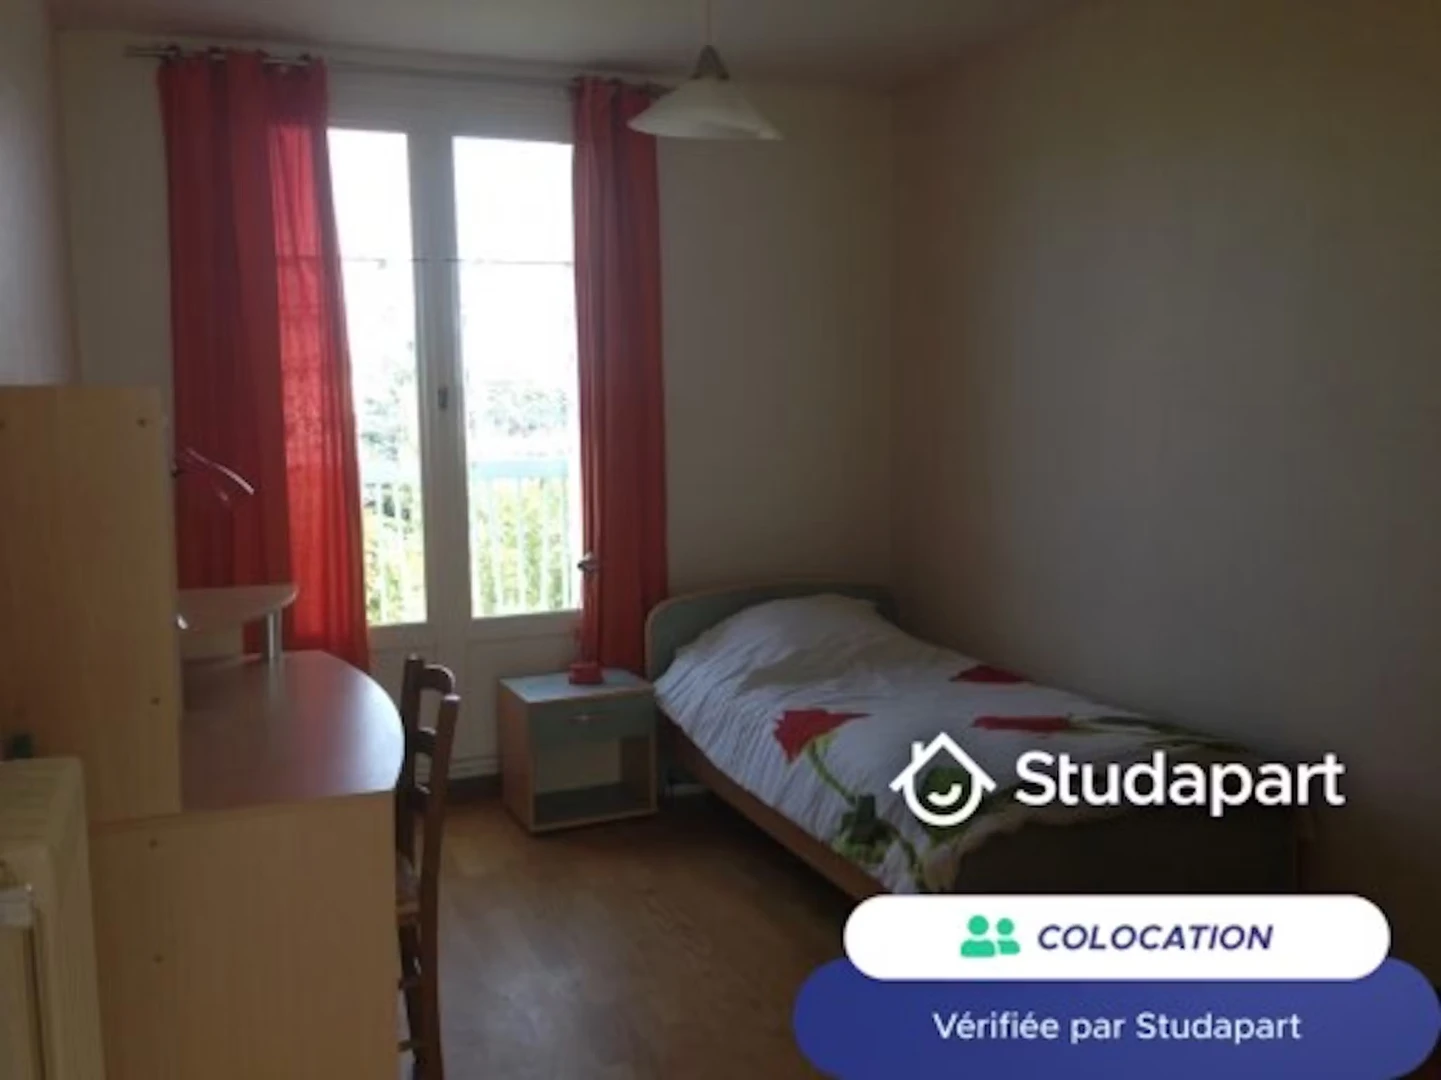 Room for rent in a shared flat in rennes